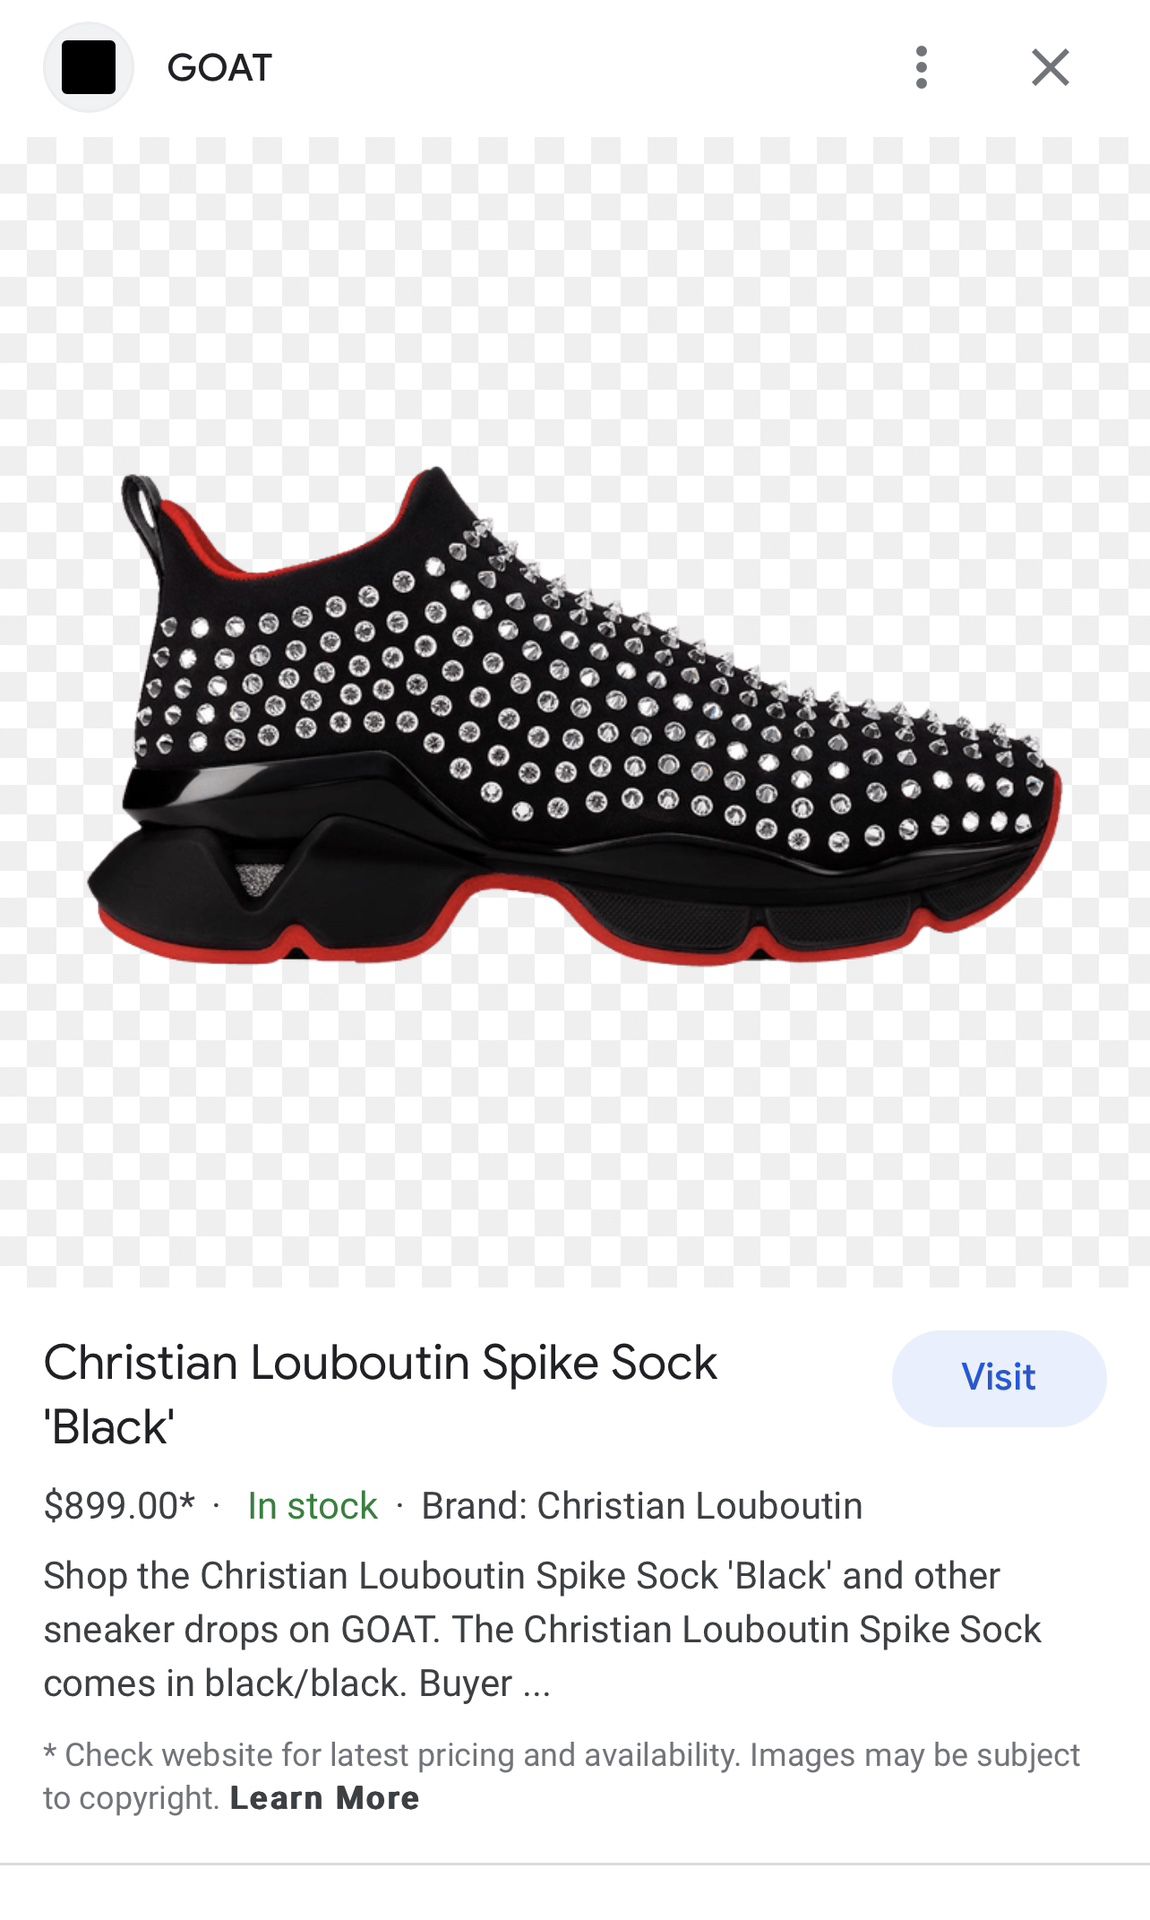 Christian Louboutin ..red Bottoms All Black Front And Back Spikes And Their  Size 9 Eu..40 for Sale in Fontana, CA - OfferUp